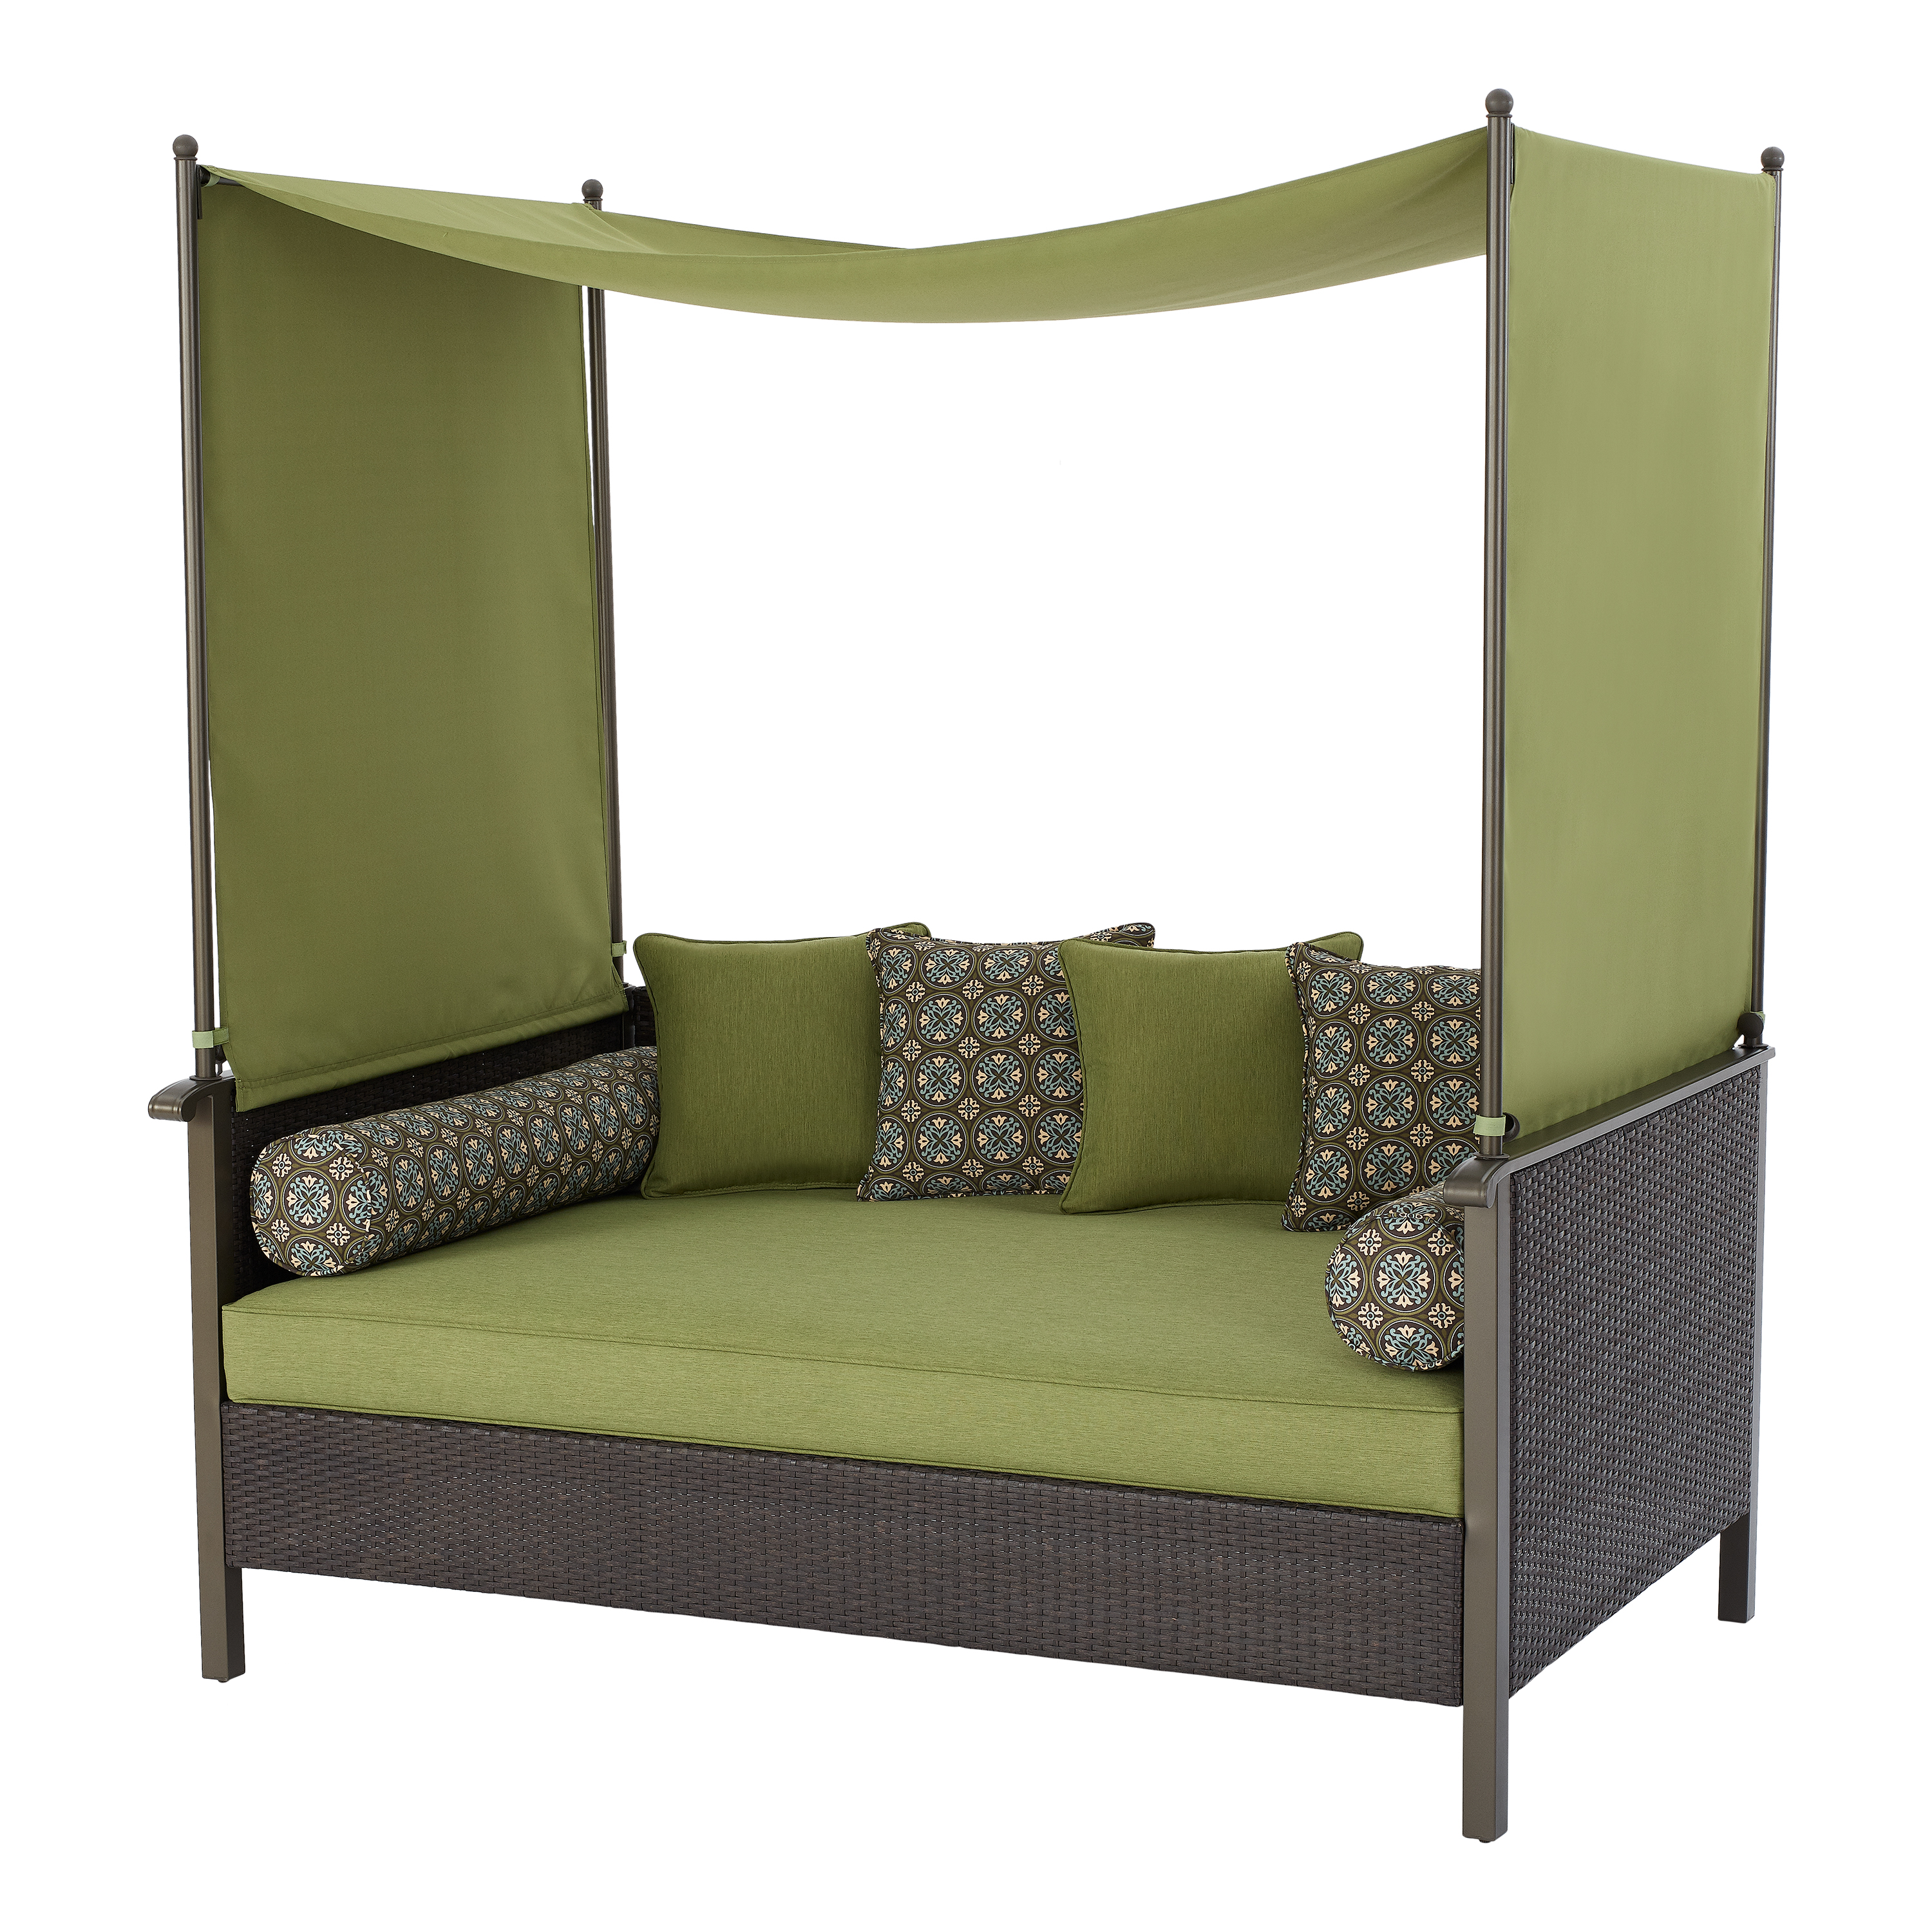 Better Homes & Gardens Providence Outdoor Daybed with Canopy, Green - image 1 of 10